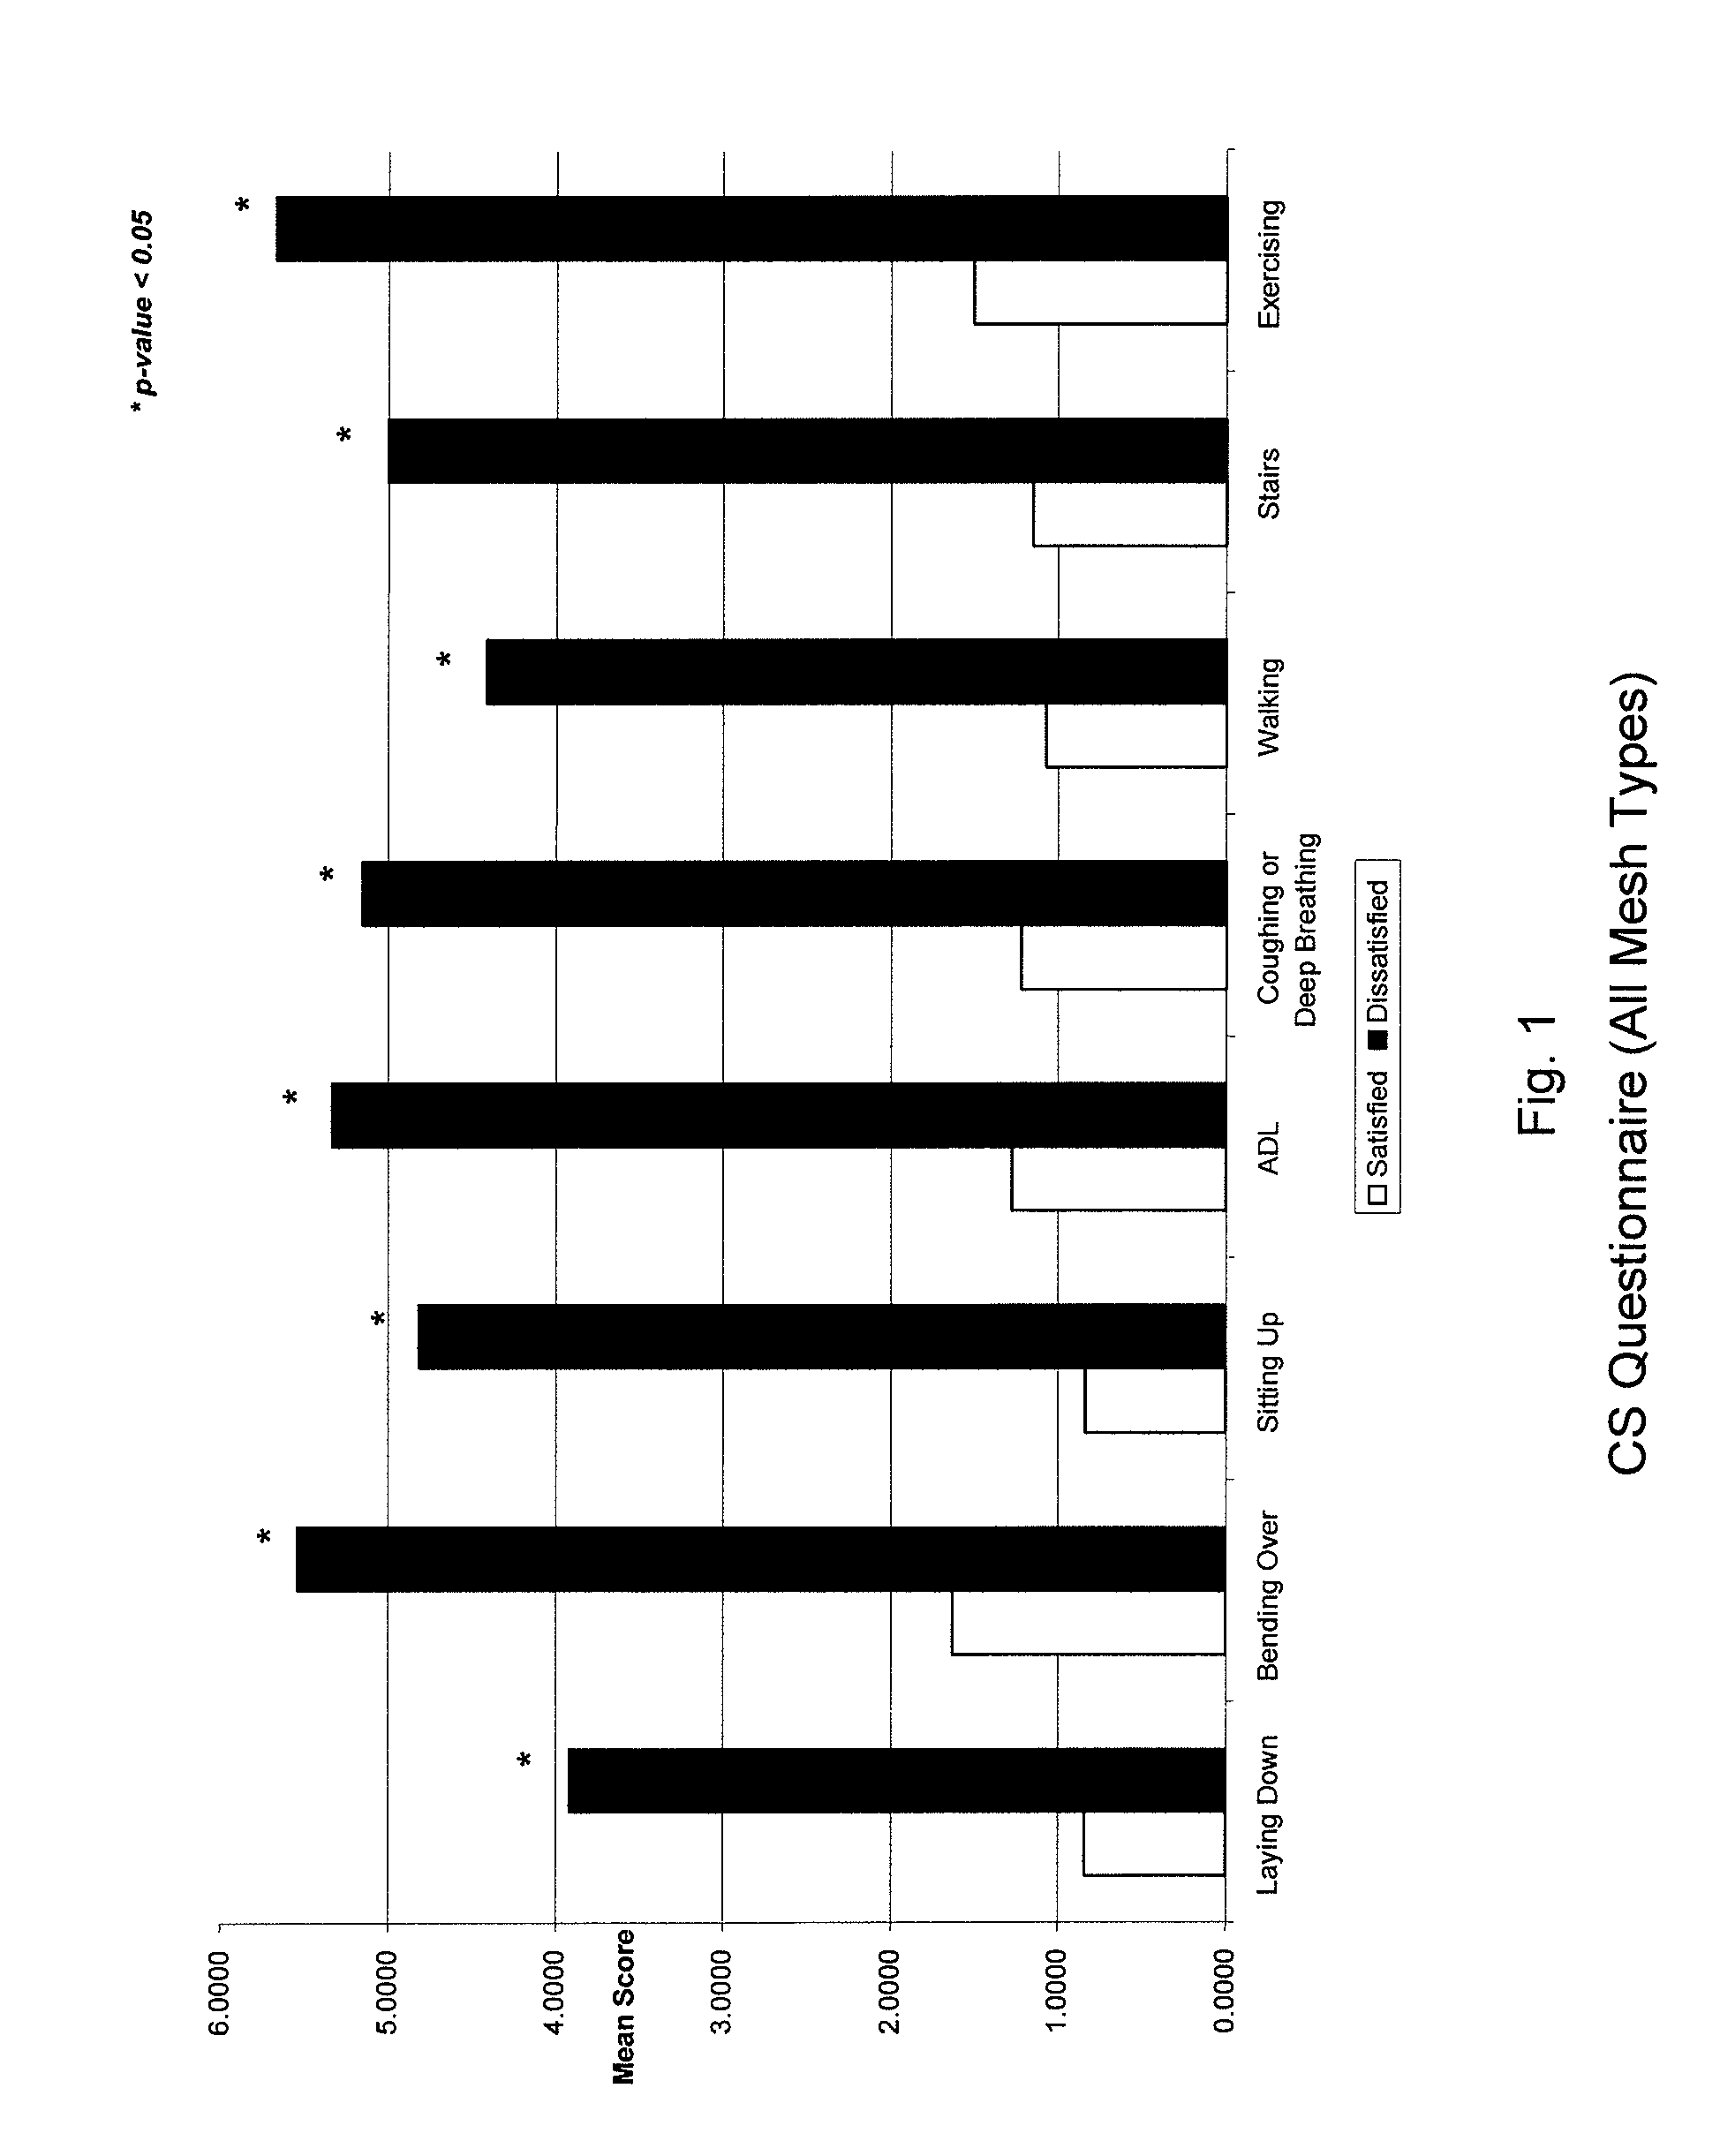 Systems, methods, and computer program products for determining an optimum hernia repair procedure